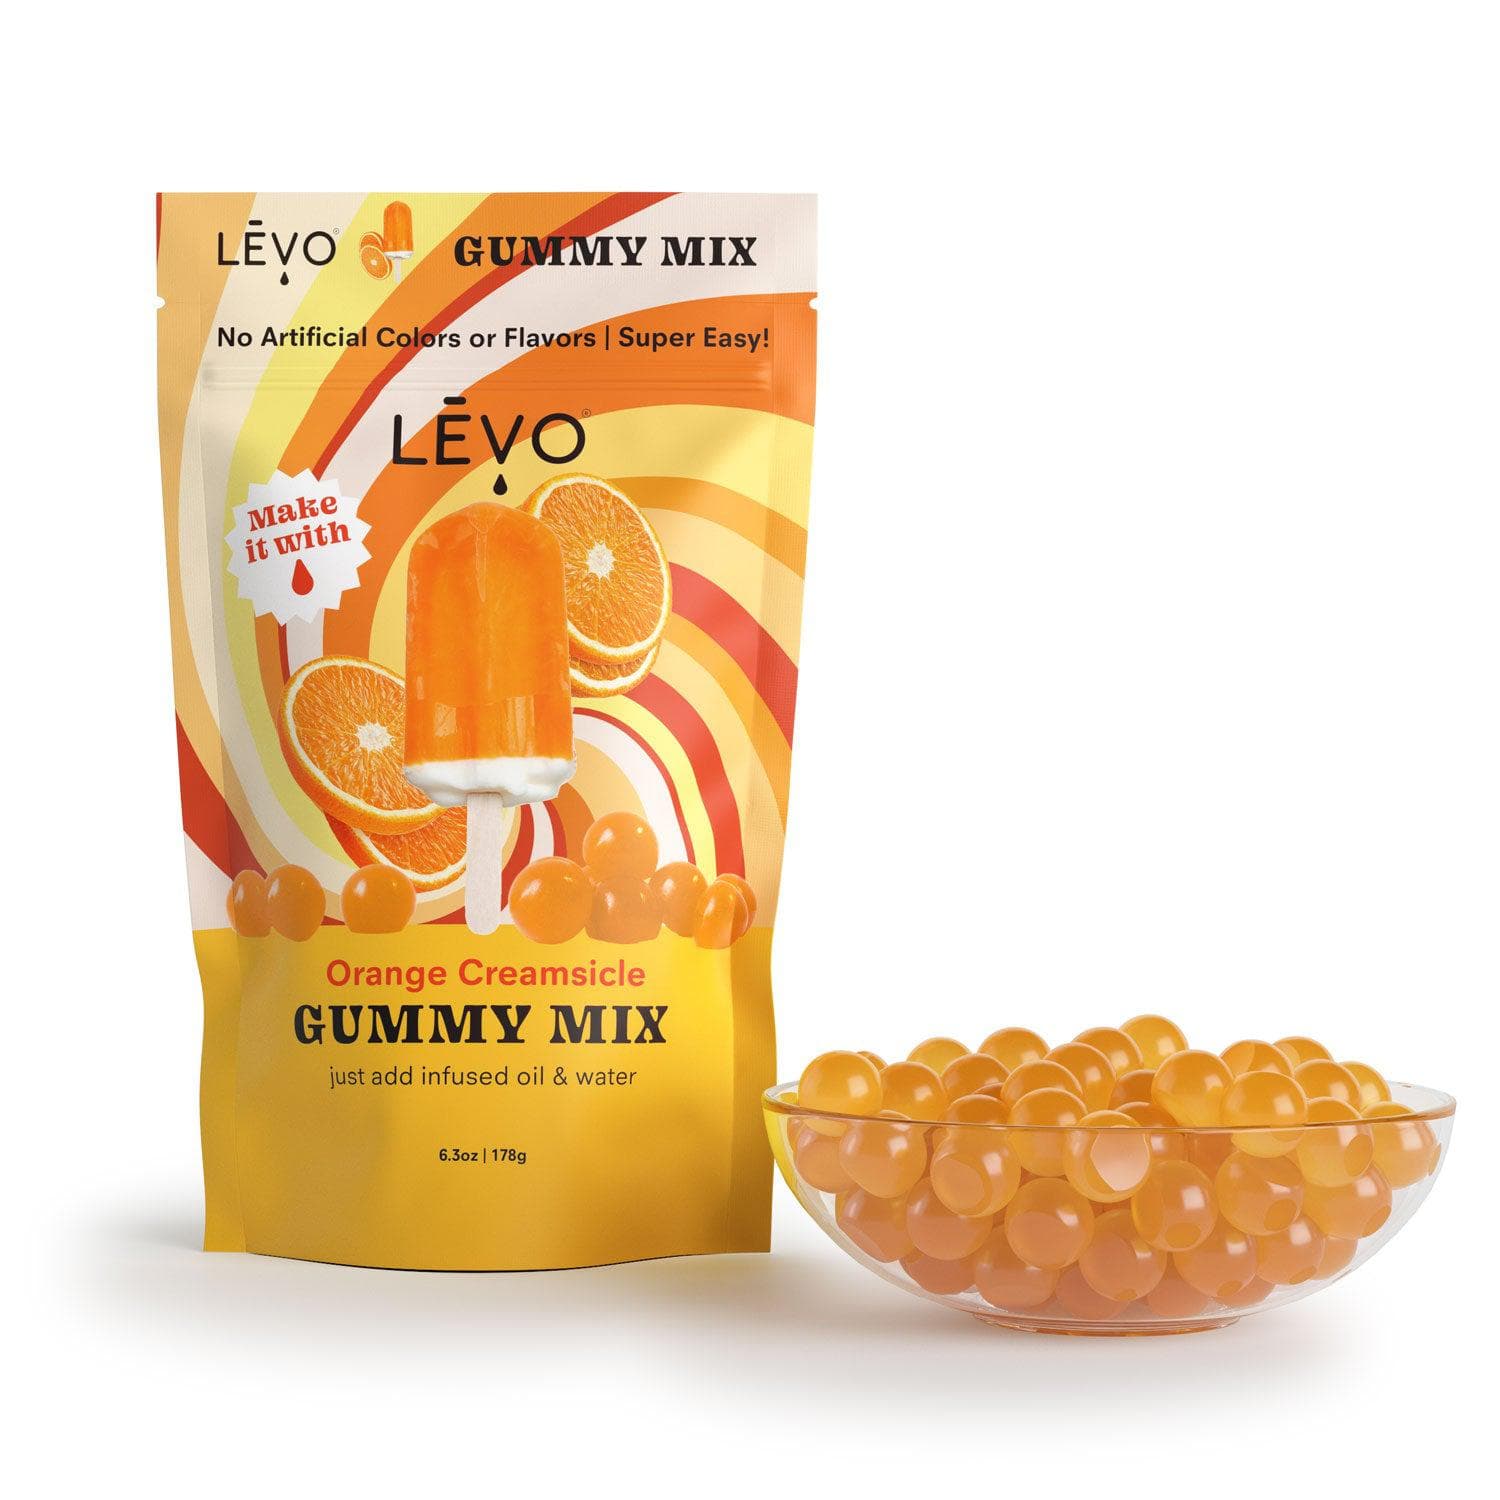 How to Make 100 Gummies in an Hour - LEVO Oil Infusion, Inc.